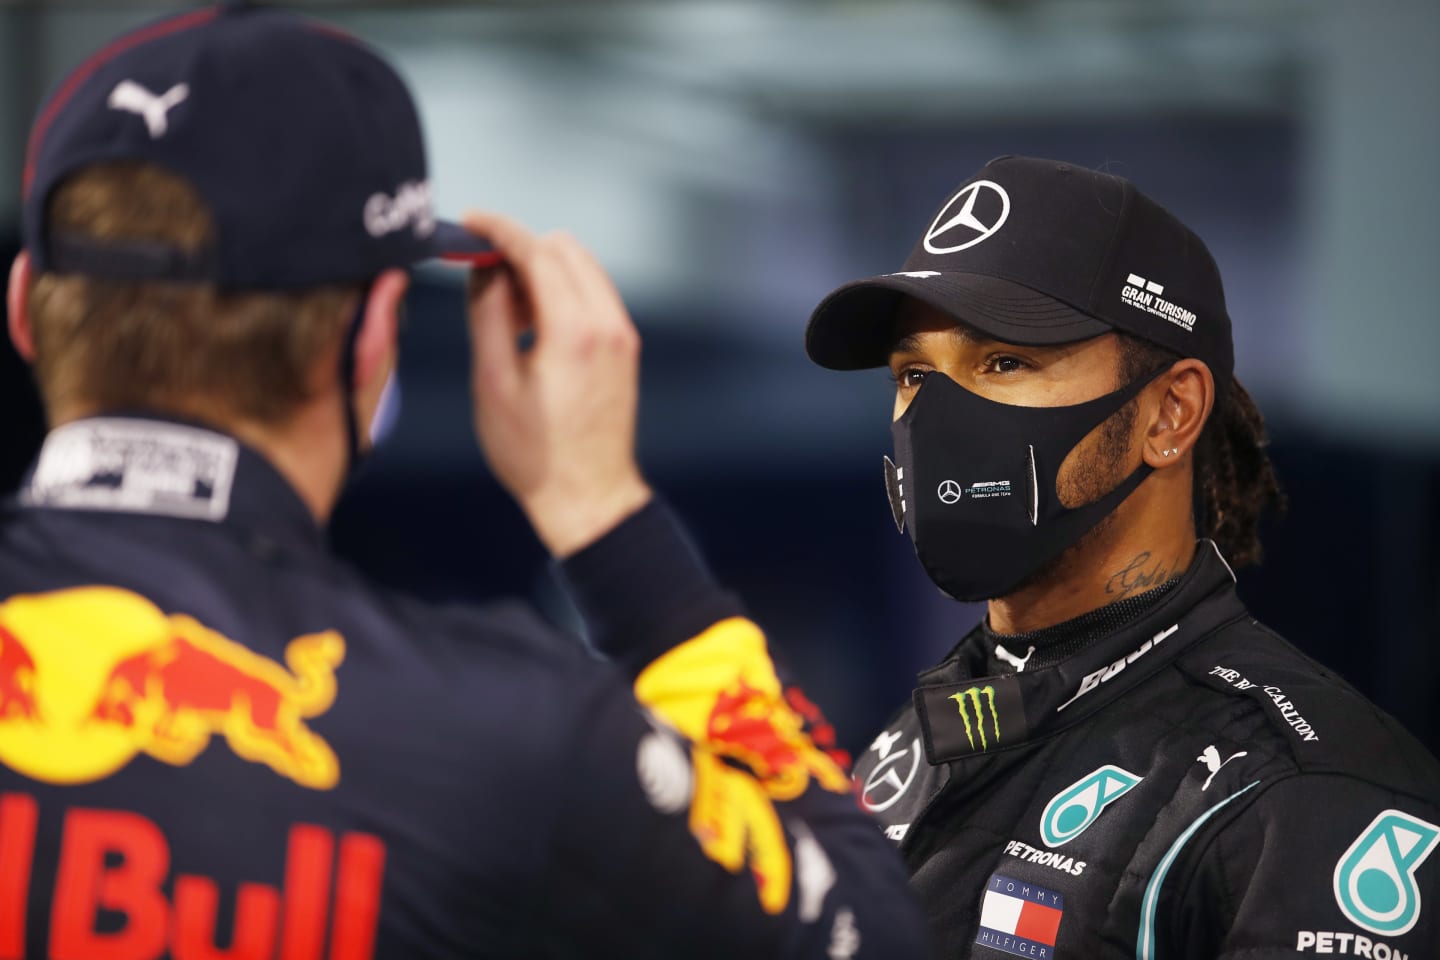 BAHRAIN, BAHRAIN - NOVEMBER 28: Pole position qualifier Lewis Hamilton of Great Britain and Mercedes GP speaks with third placed qualifier Max Verstappen of Netherlands and Red Bull Racing in parc ferme during qualifying ahead of the F1 Grand Prix of Bahrain at Bahrain International Circuit on November 28, 2020 in Bahrain, Bahrain. (Photo by Hamad Mohammed - Pool/Getty Images)